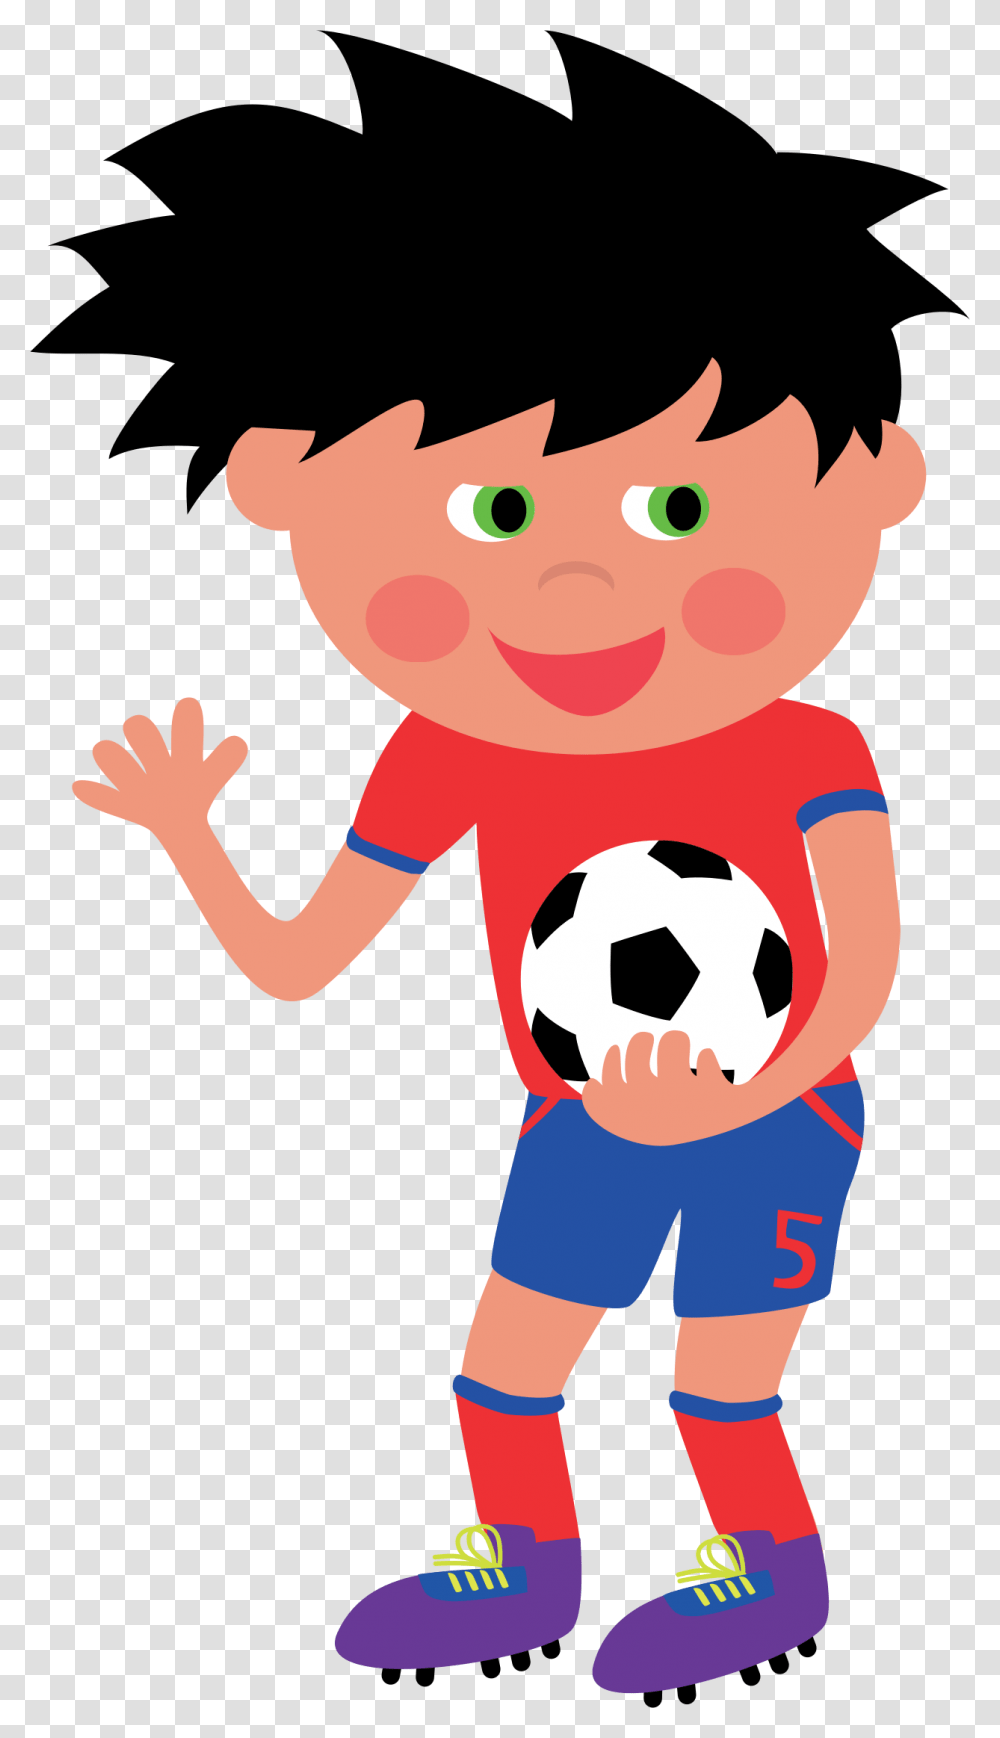 Animated Pictures Of Common Nouns, Person, Human, People, Soccer Ball Transparent Png